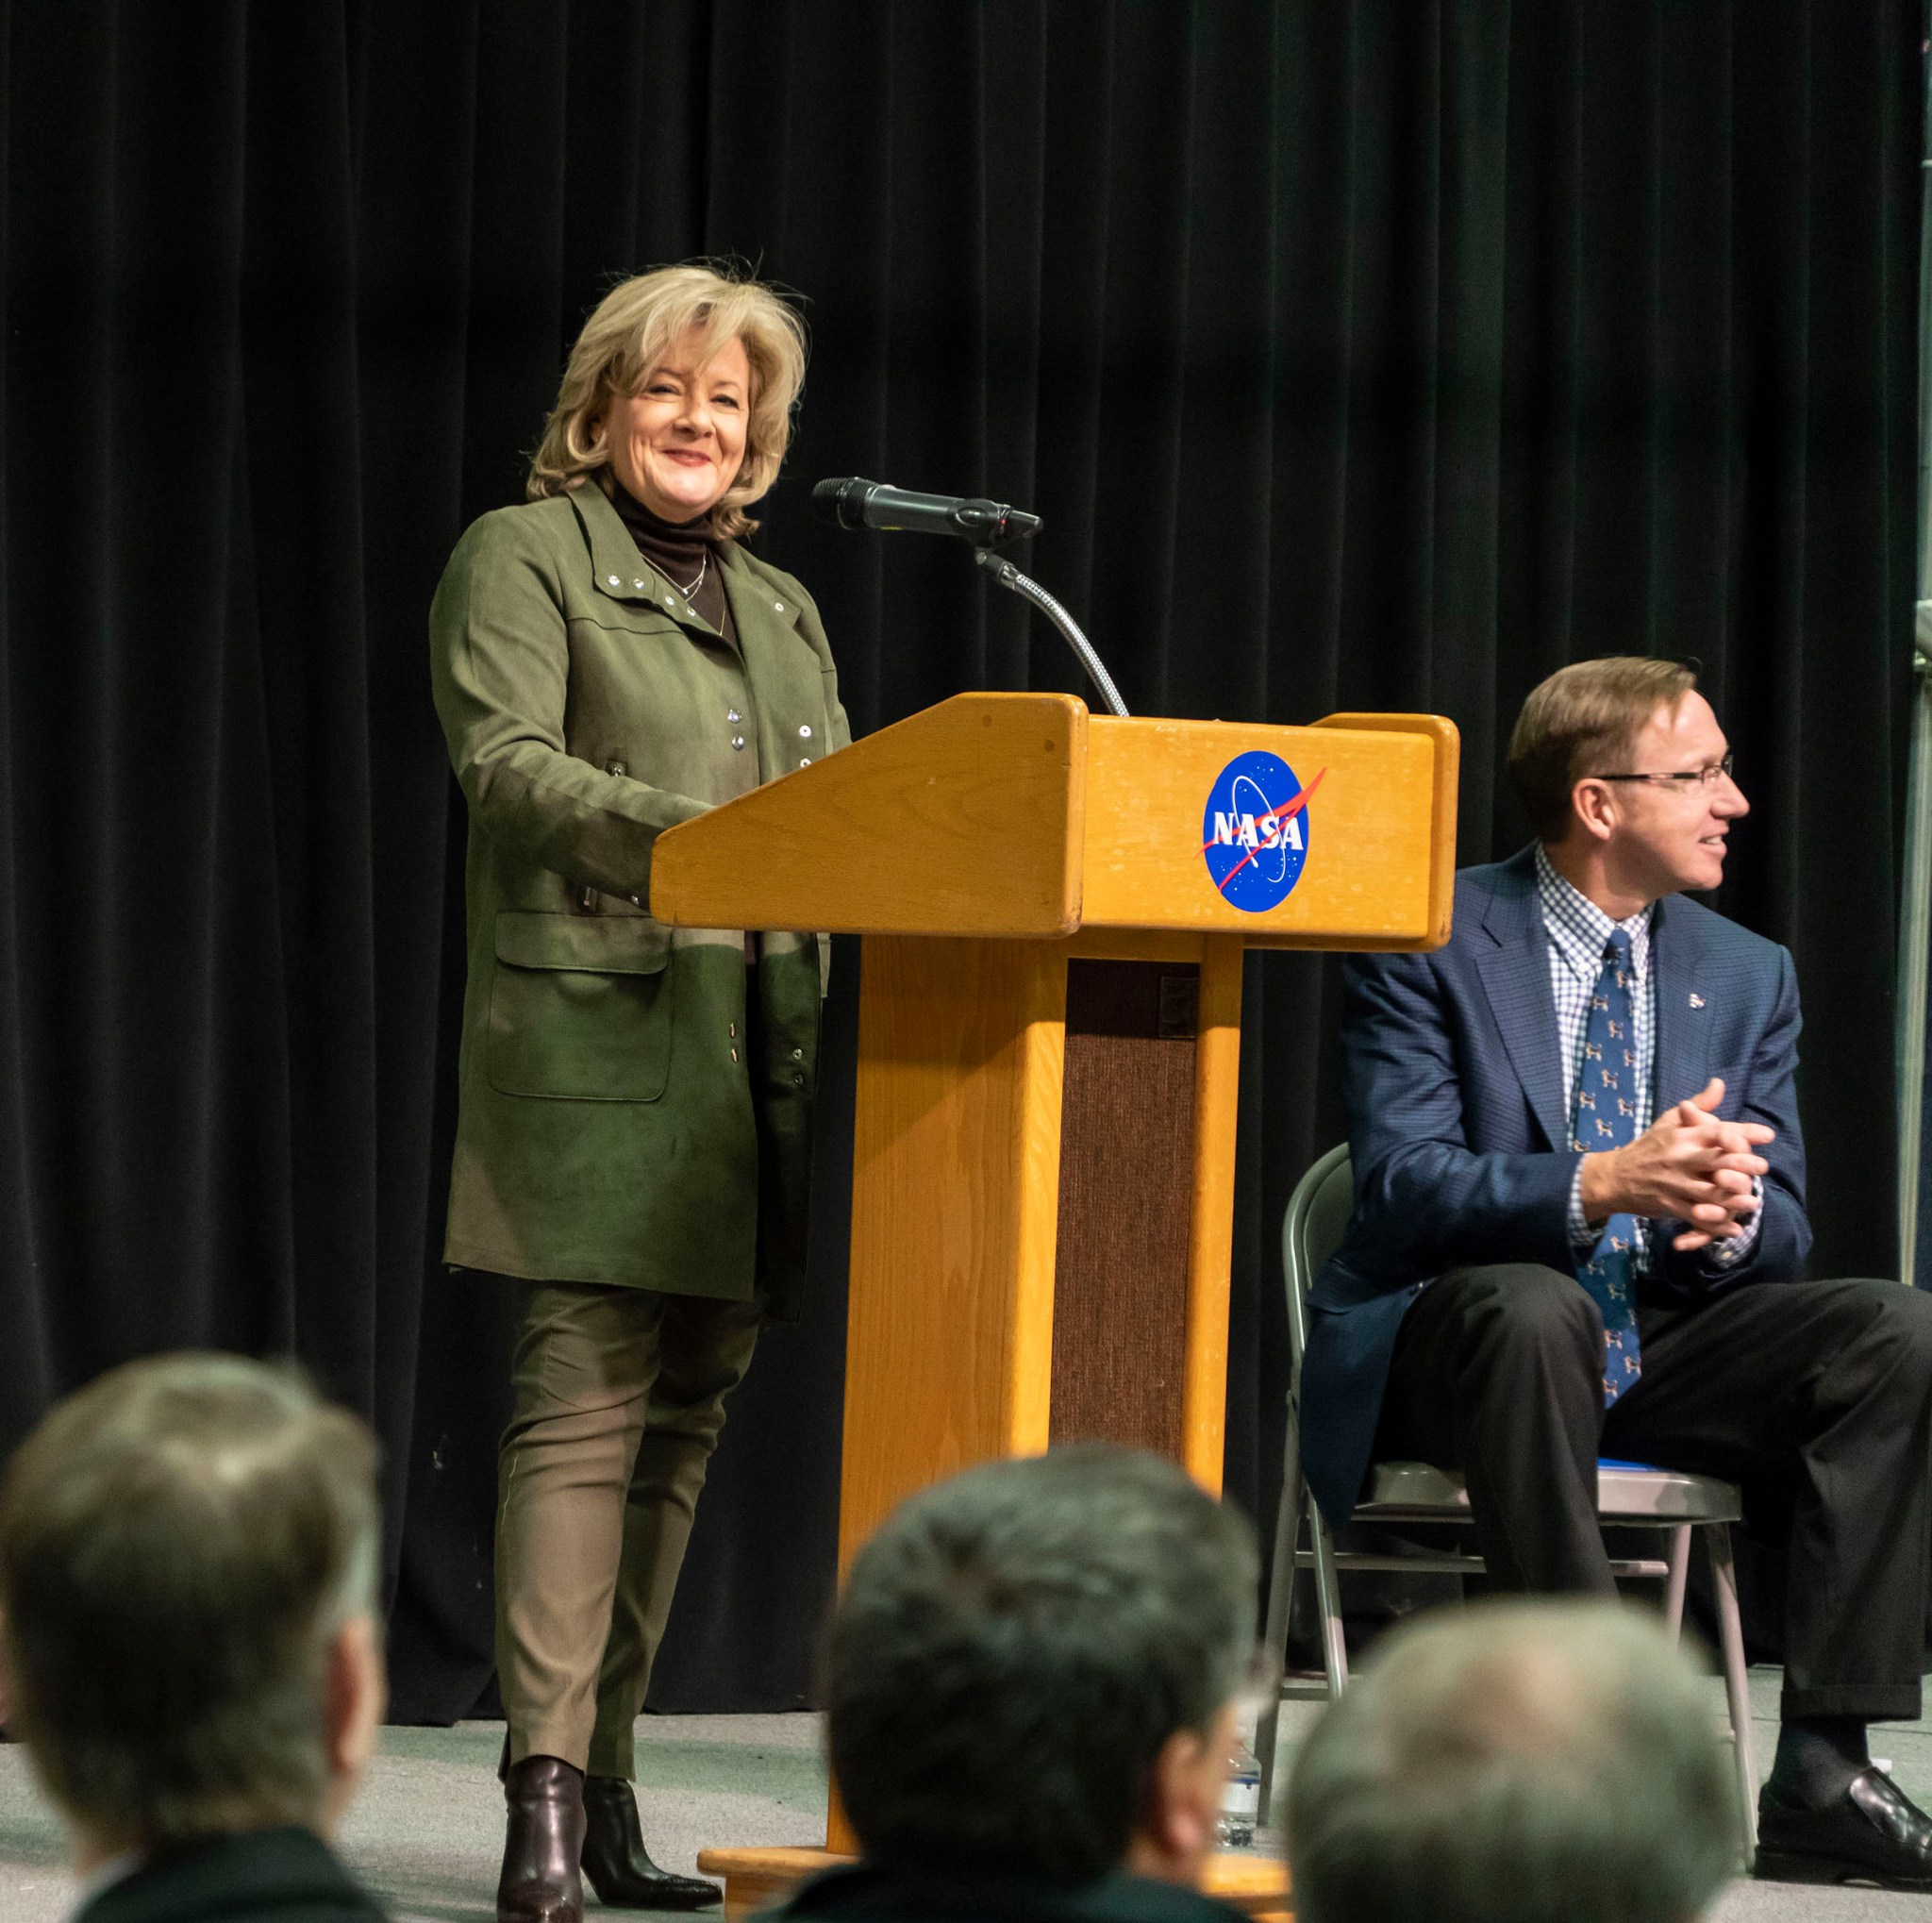 At a Jan. 31 all-hands meeting, NASA Marshall Space Flight Center Director Jody Singer welcomed team members back.